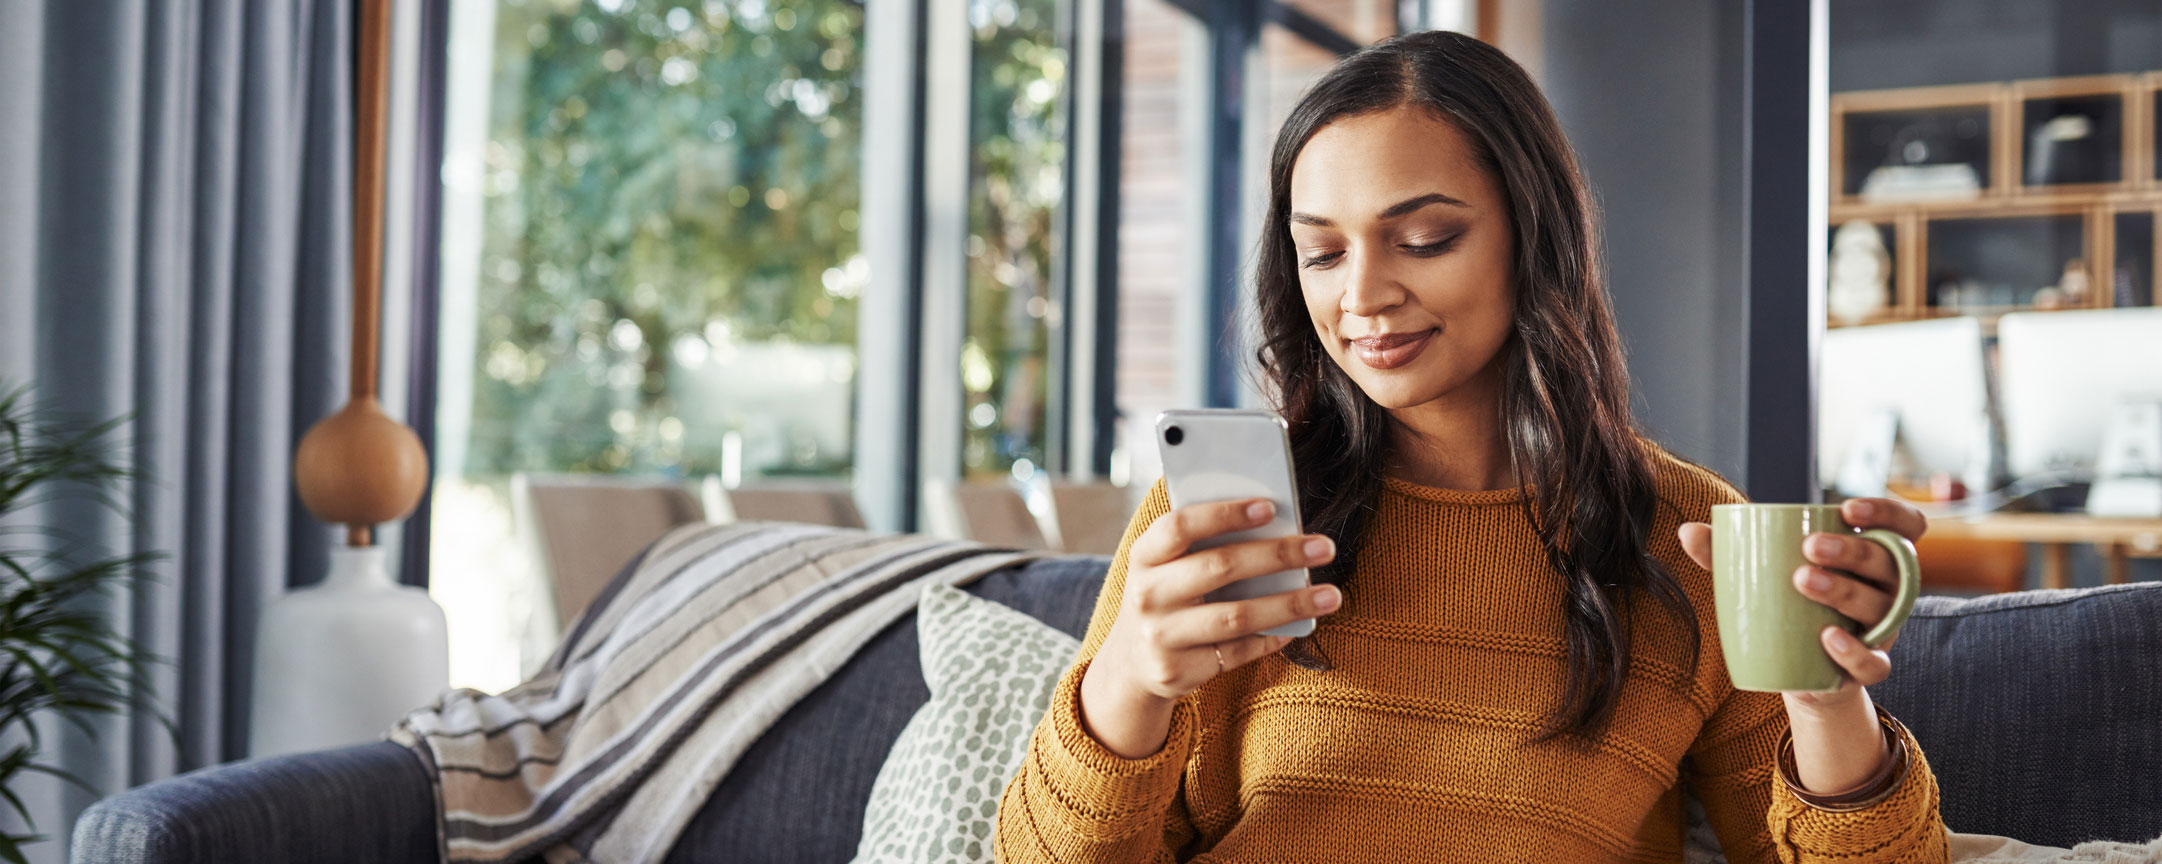 Woman looking at phone while sitting on couch